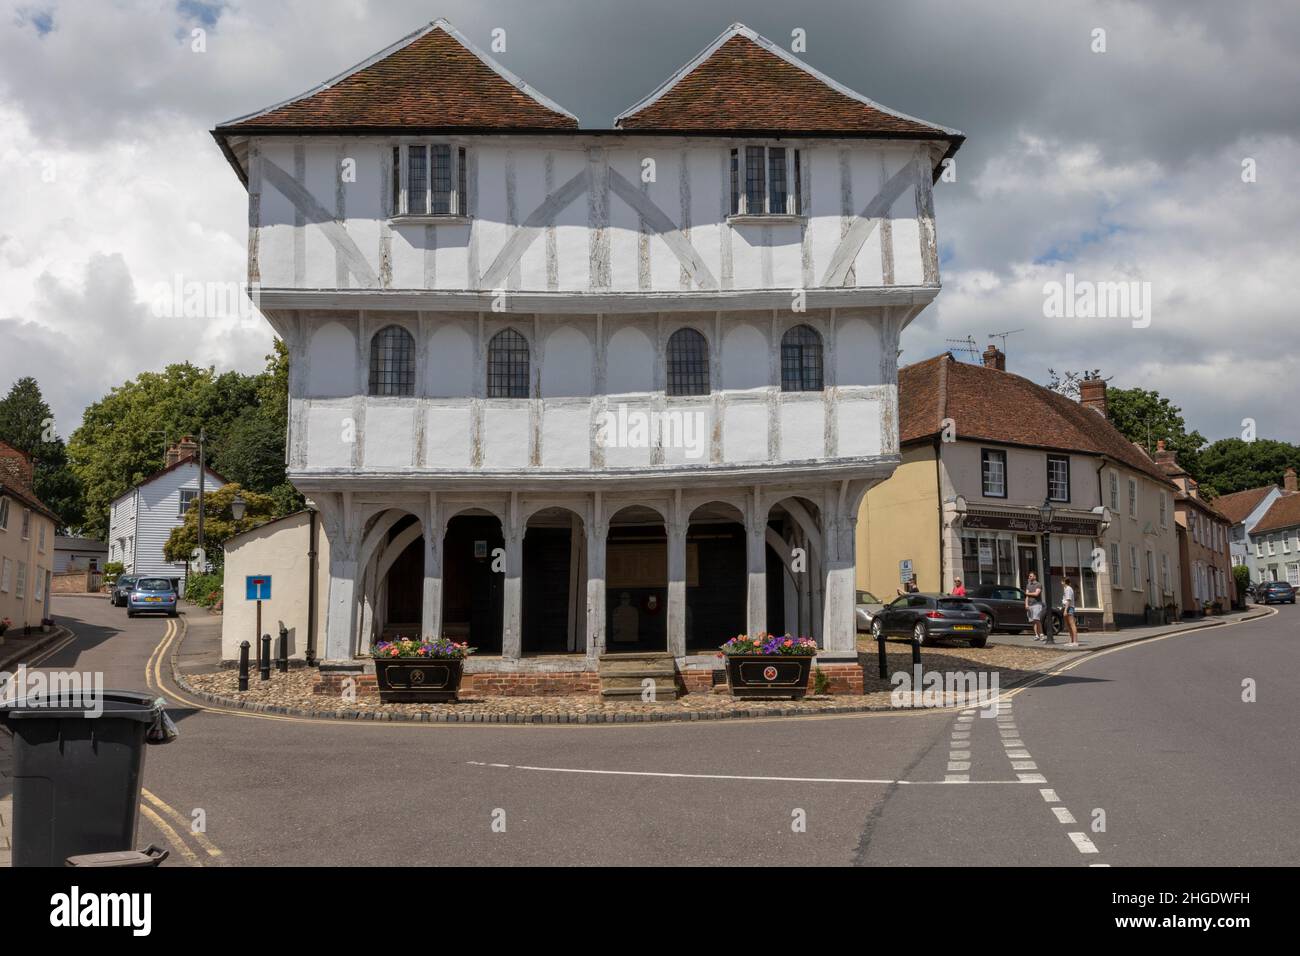 The Guildhall, Thaxted, Essex Stockfoto